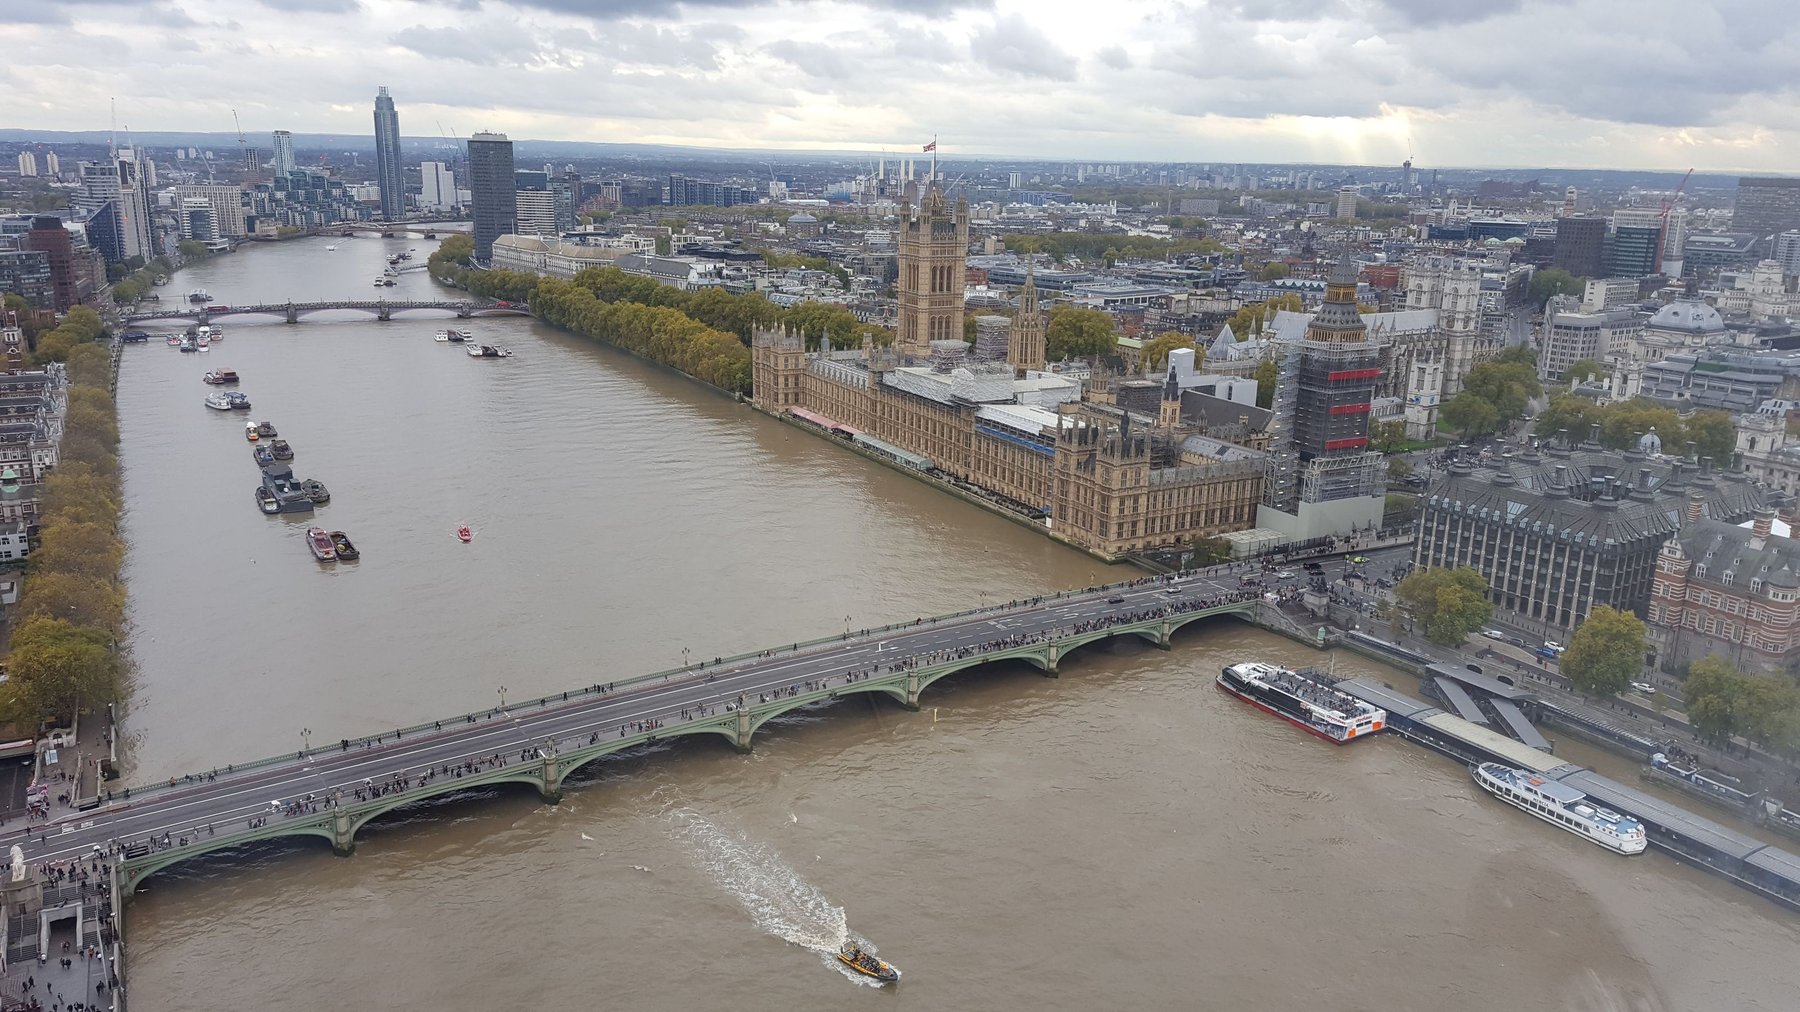 Bridges crossing the River Thames, viewed from high up. Big Ben is on the other side, surrounded by scaffolding.